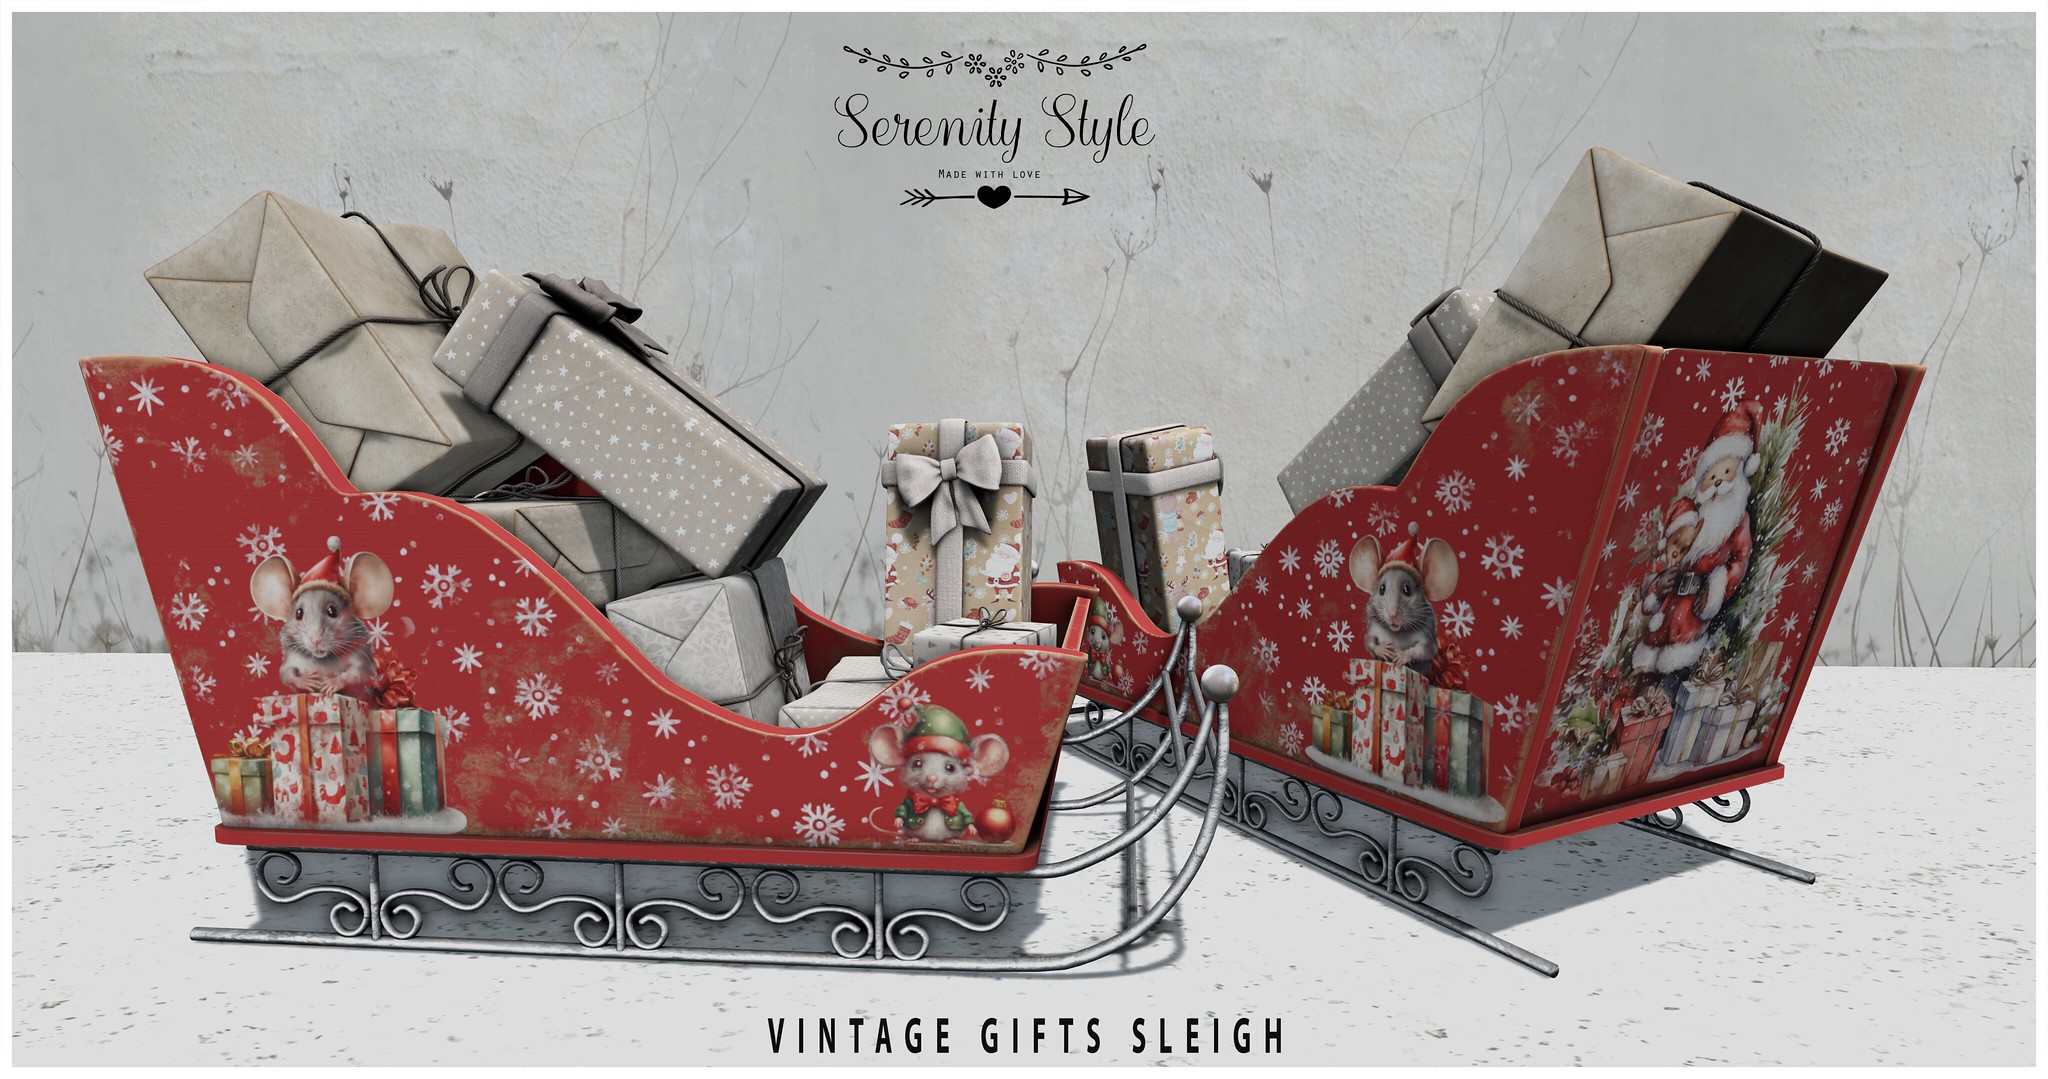 Serenity Style – Vintage Gifts Sleigh